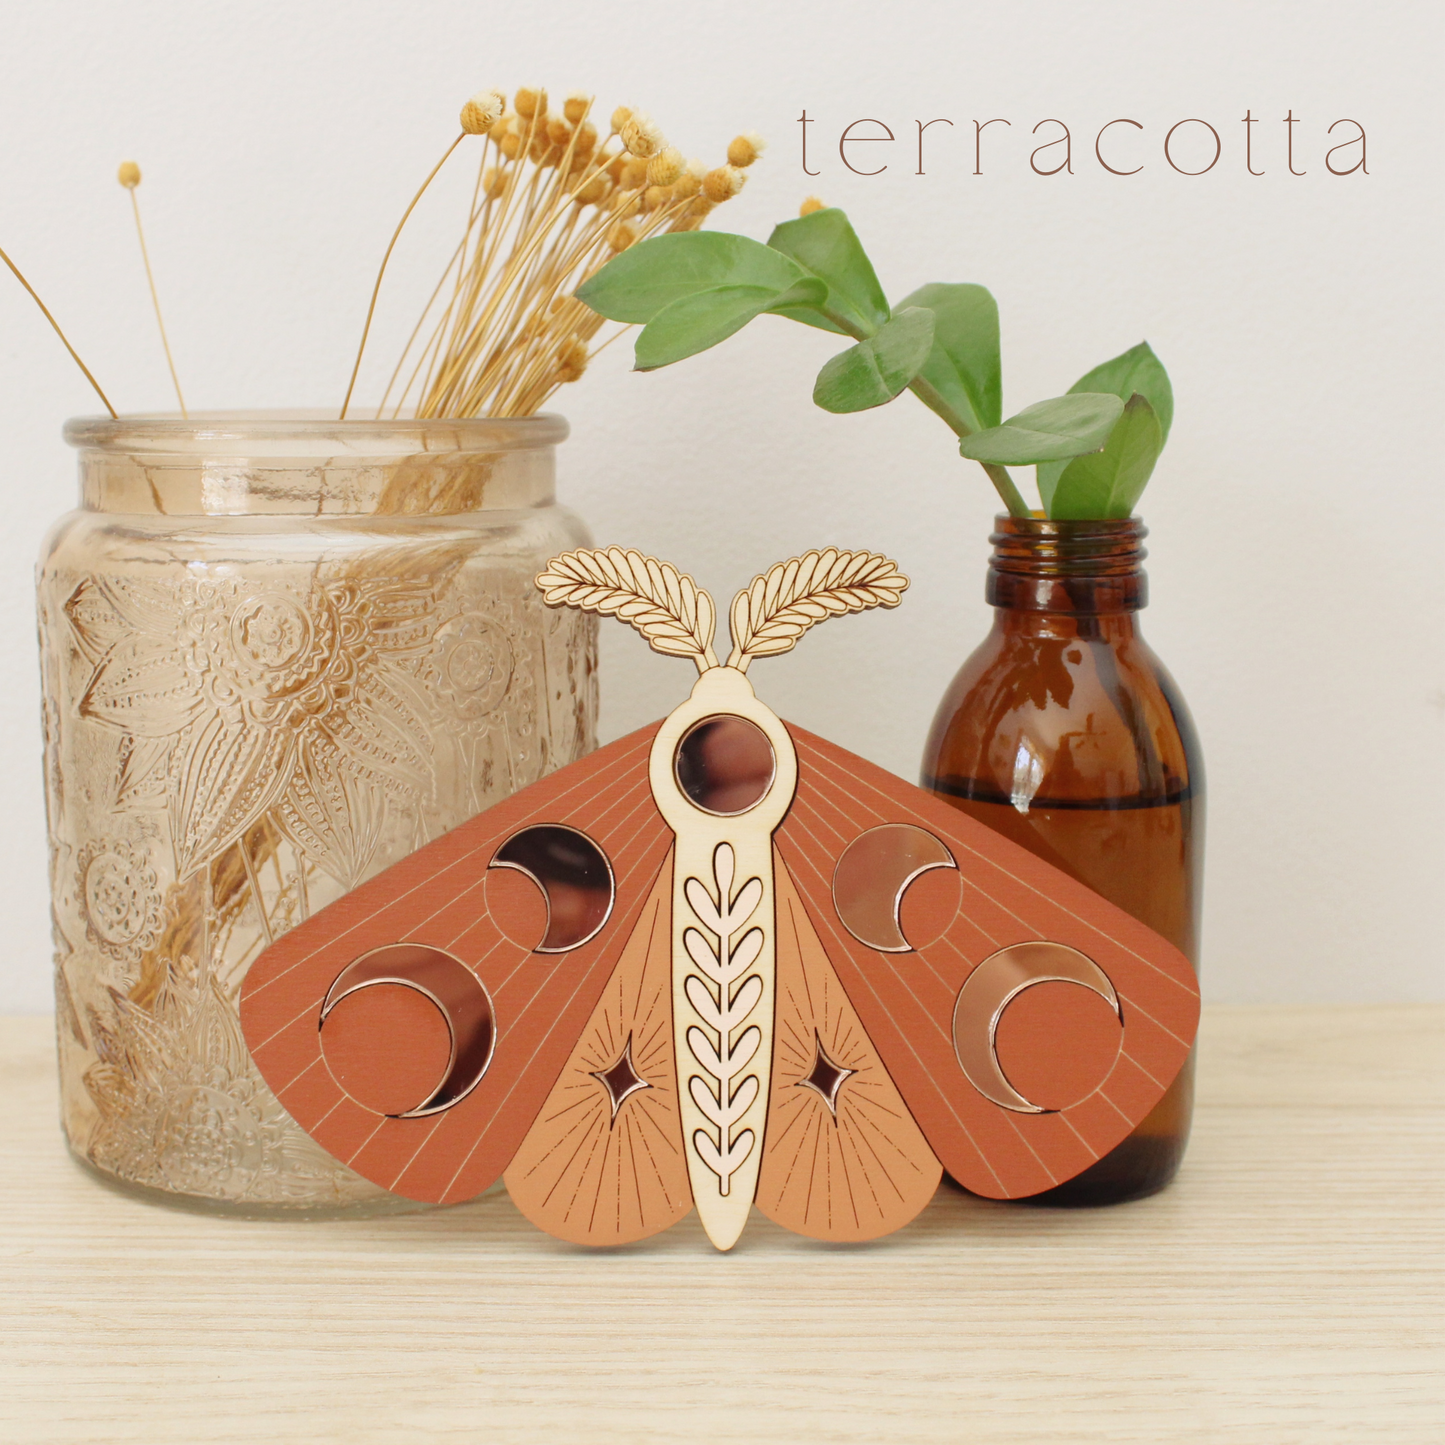 wooden moth with moon phase design. painted in orange and terracotta reds with wood tones and mirrored rose gold moon phase inlays.